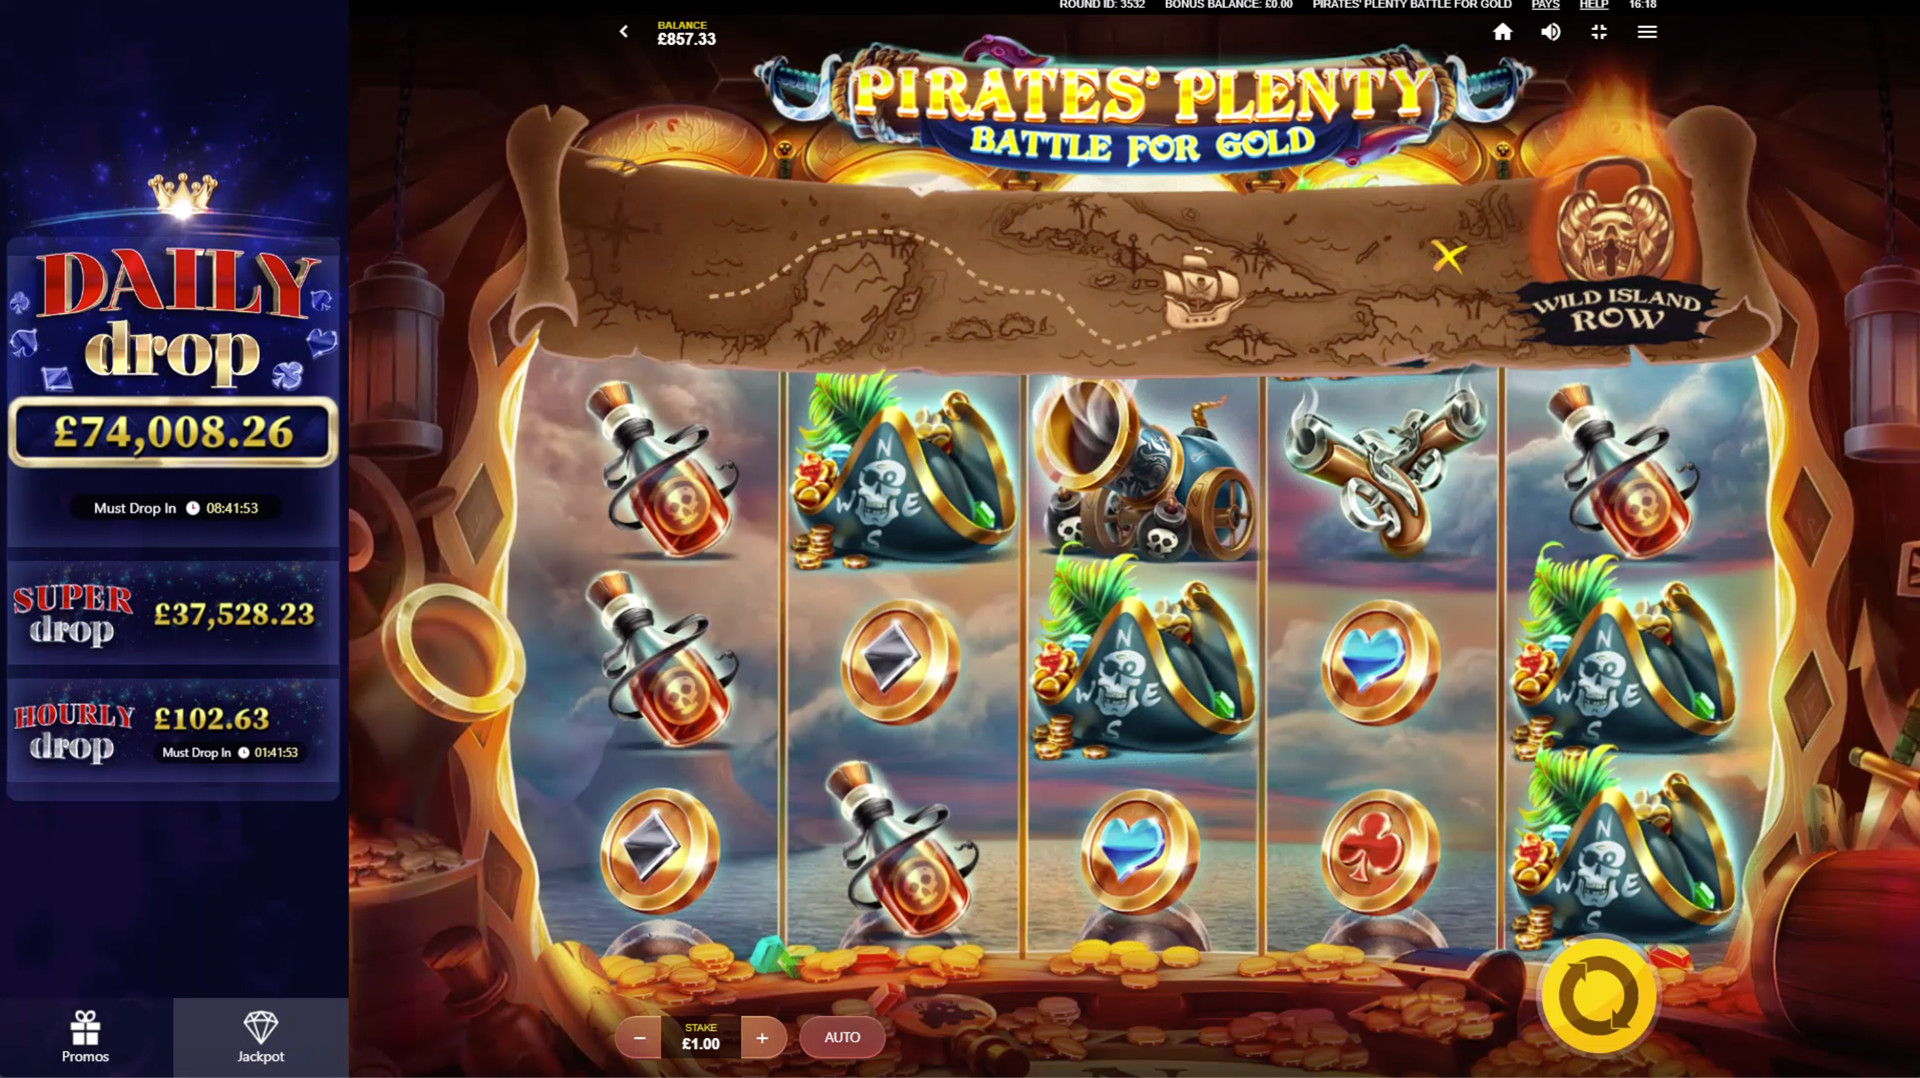 Must Drop HUD in Red Tigers Pirate's Plenty Battle For Gold